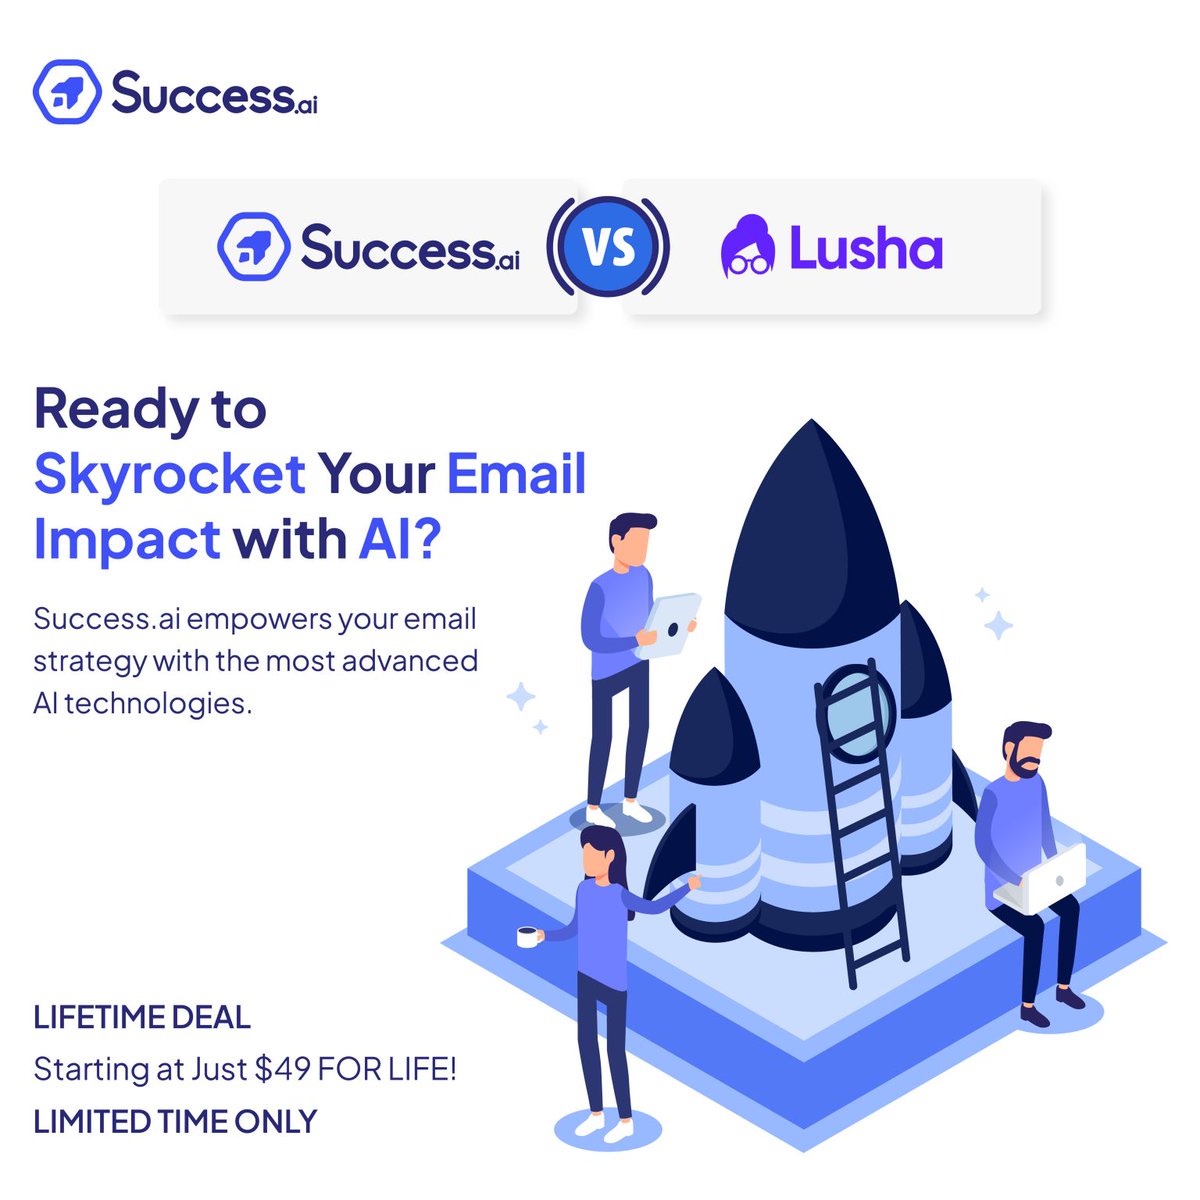 Elevate your email strategy with Success.ai's advanced AI tech! 🚀
Automate campaigns like never before – a step above Lusha.com.
#AIEmailEfficiency #SuccessAi #Lusha #EmailMarketing #B2BLeads